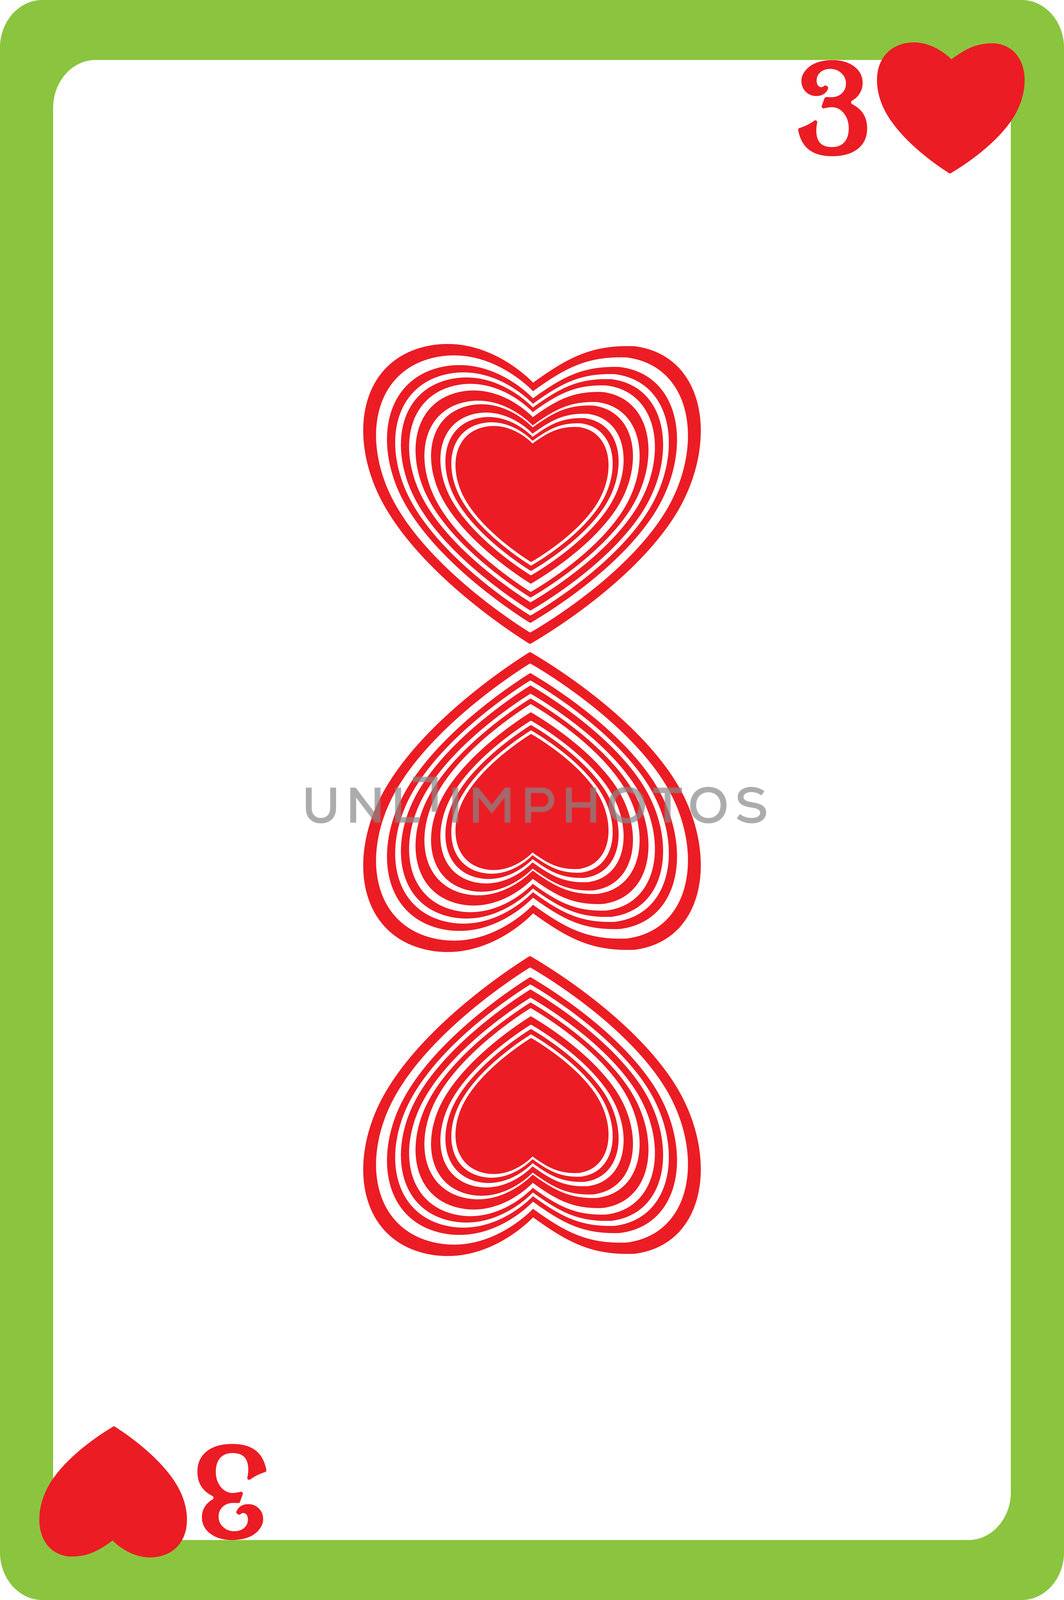 Scale hand drawn illustration of a playing card representing the three of hearts, one element of a deck